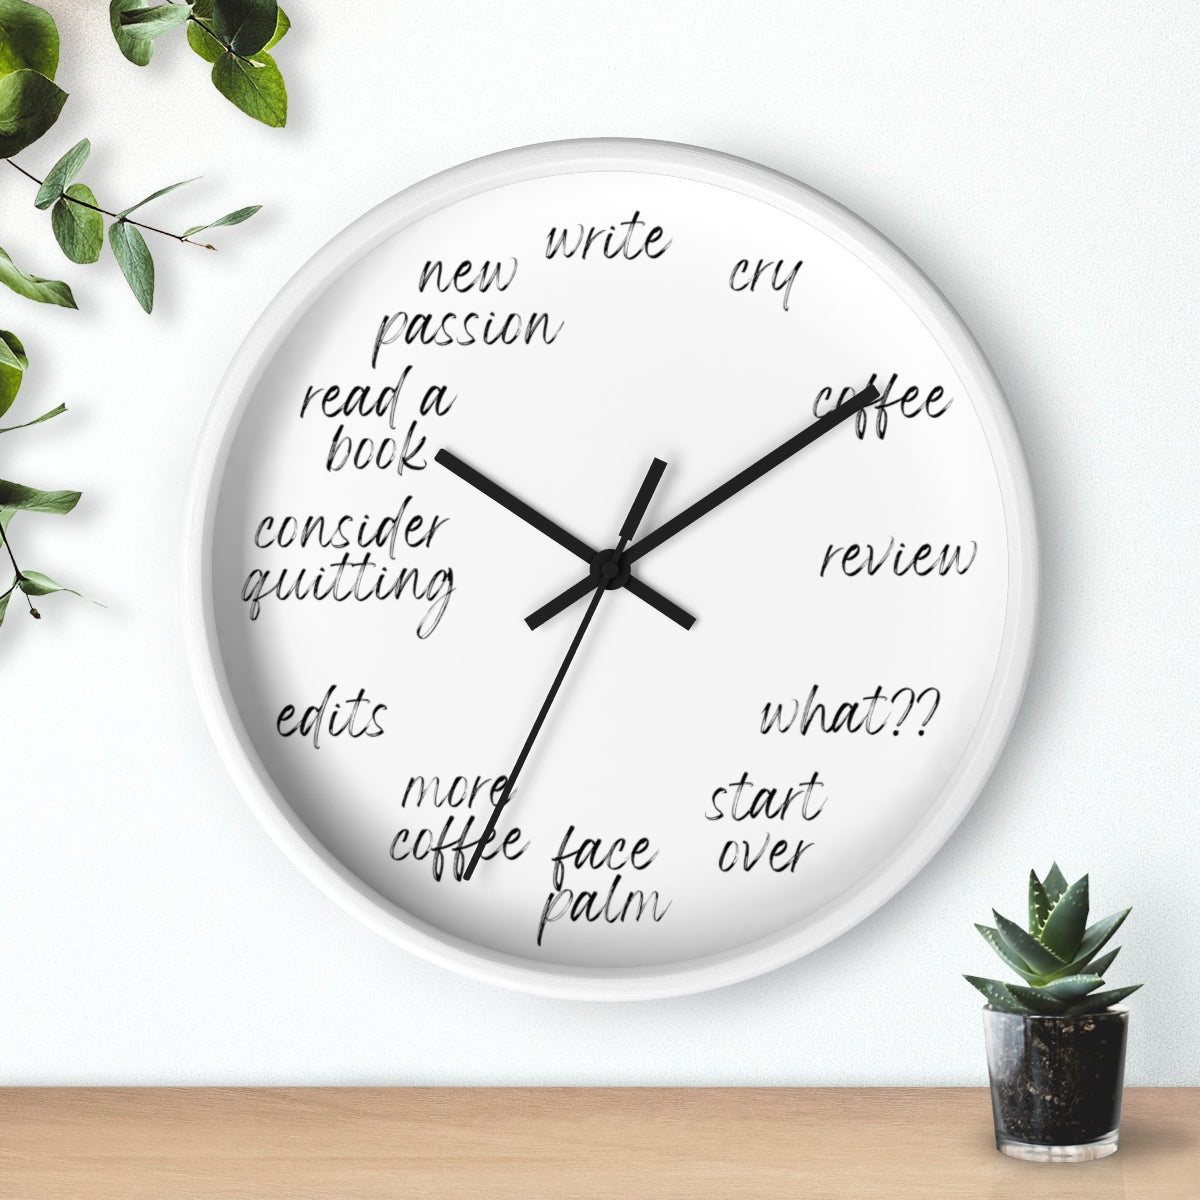 A "A Day in the Life of an Author // Writing Themed" wall clock with storytelling keywords written on it.